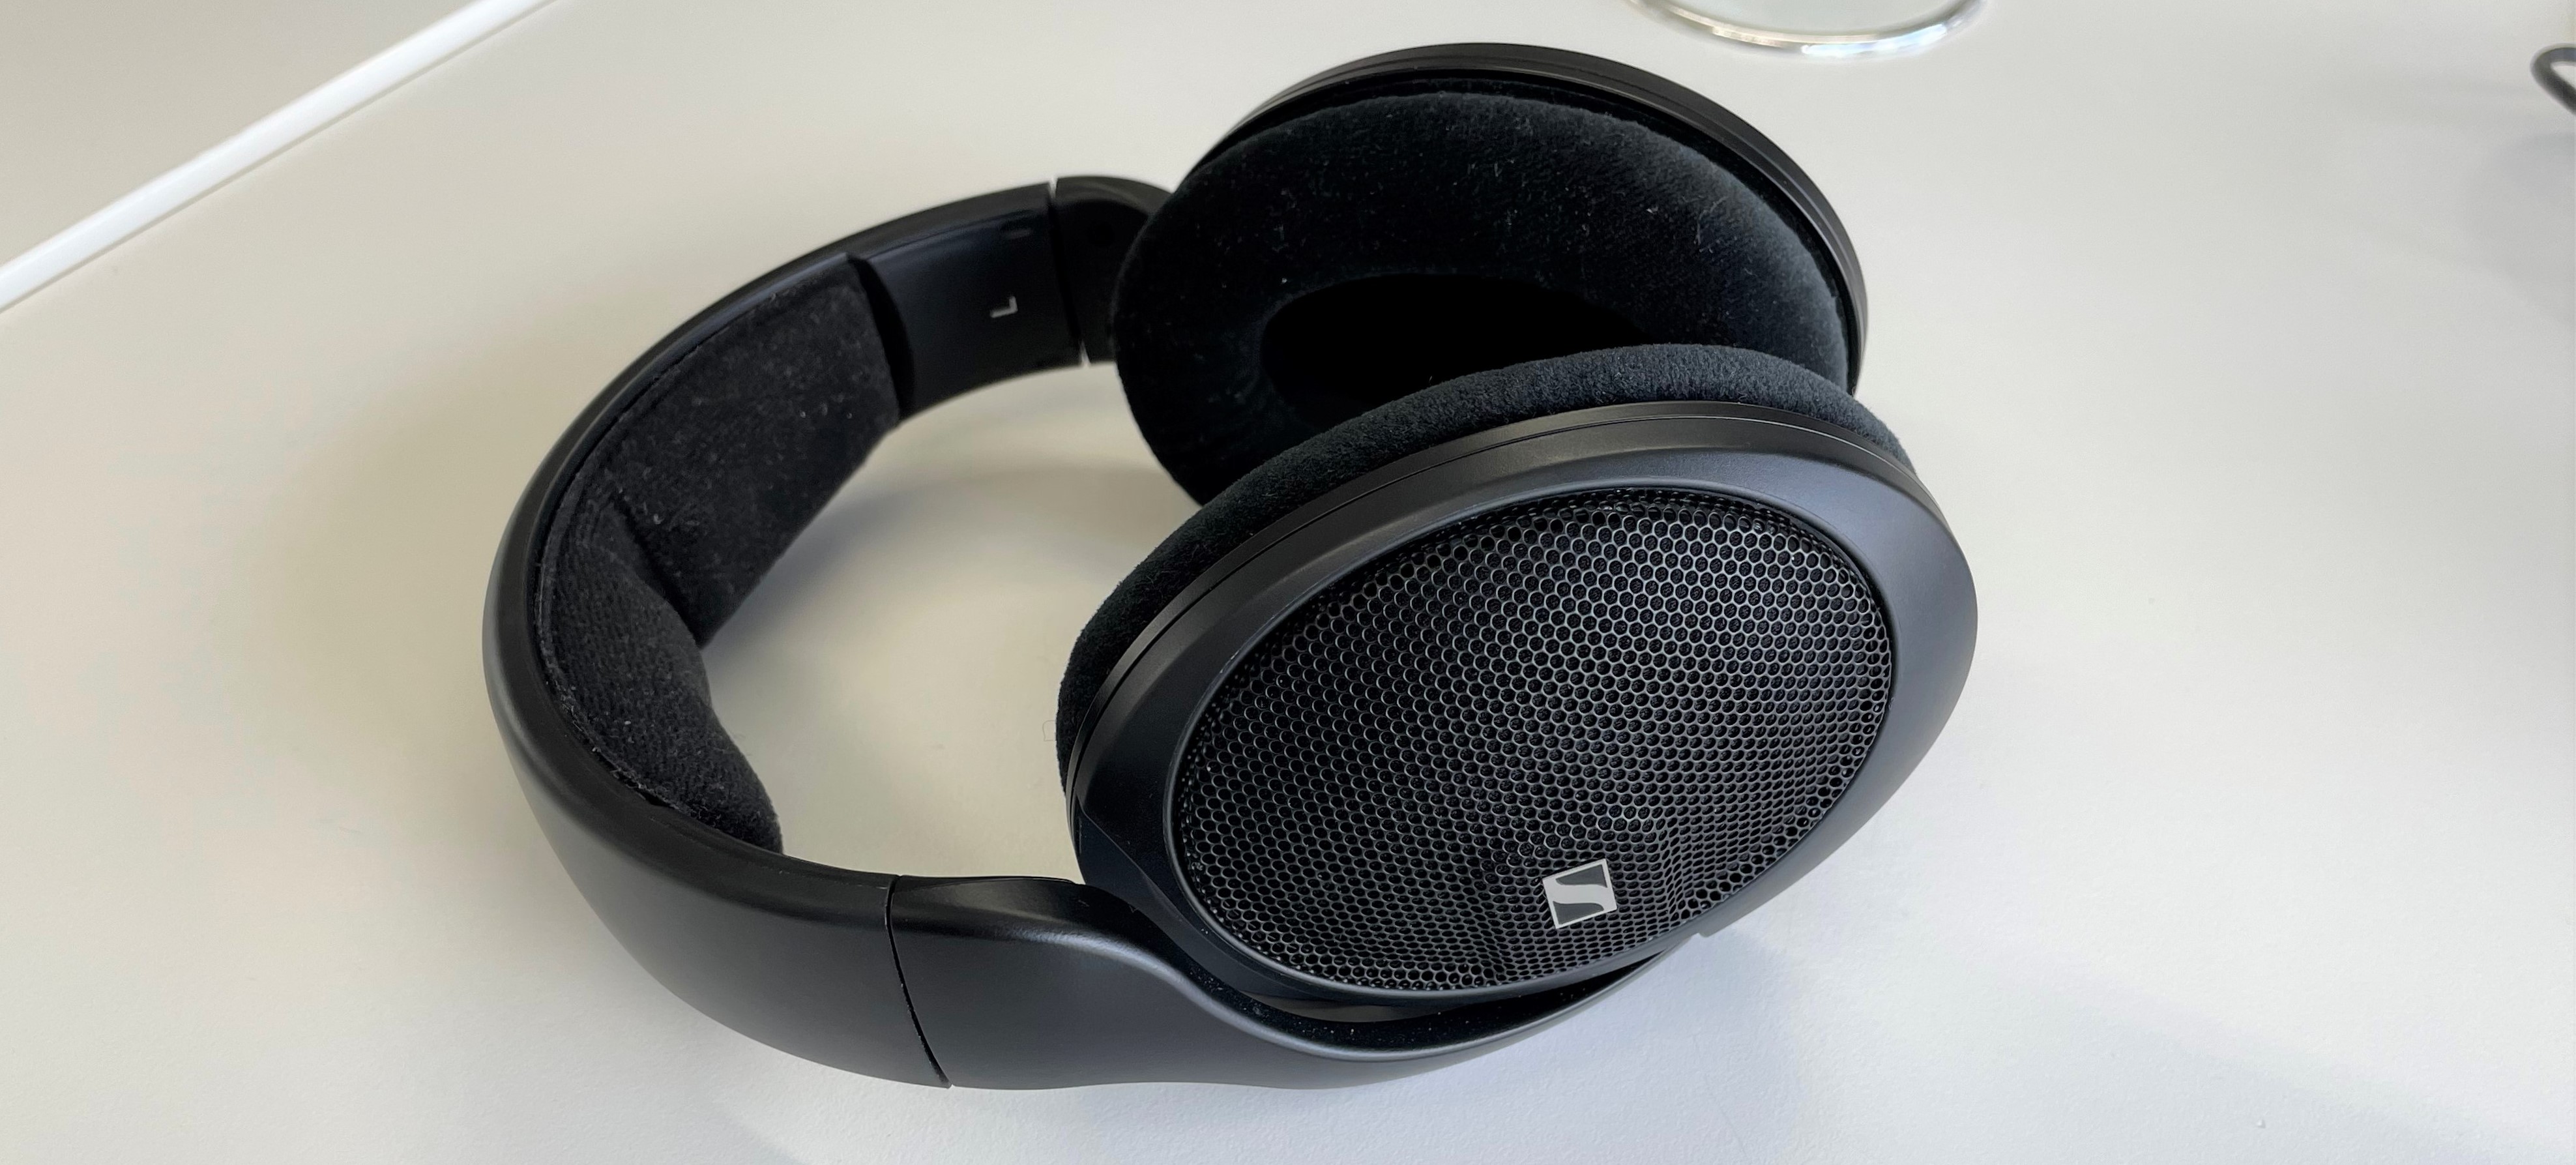 Sennheiser HD 560S Review - For The Masterful Not The Typical 